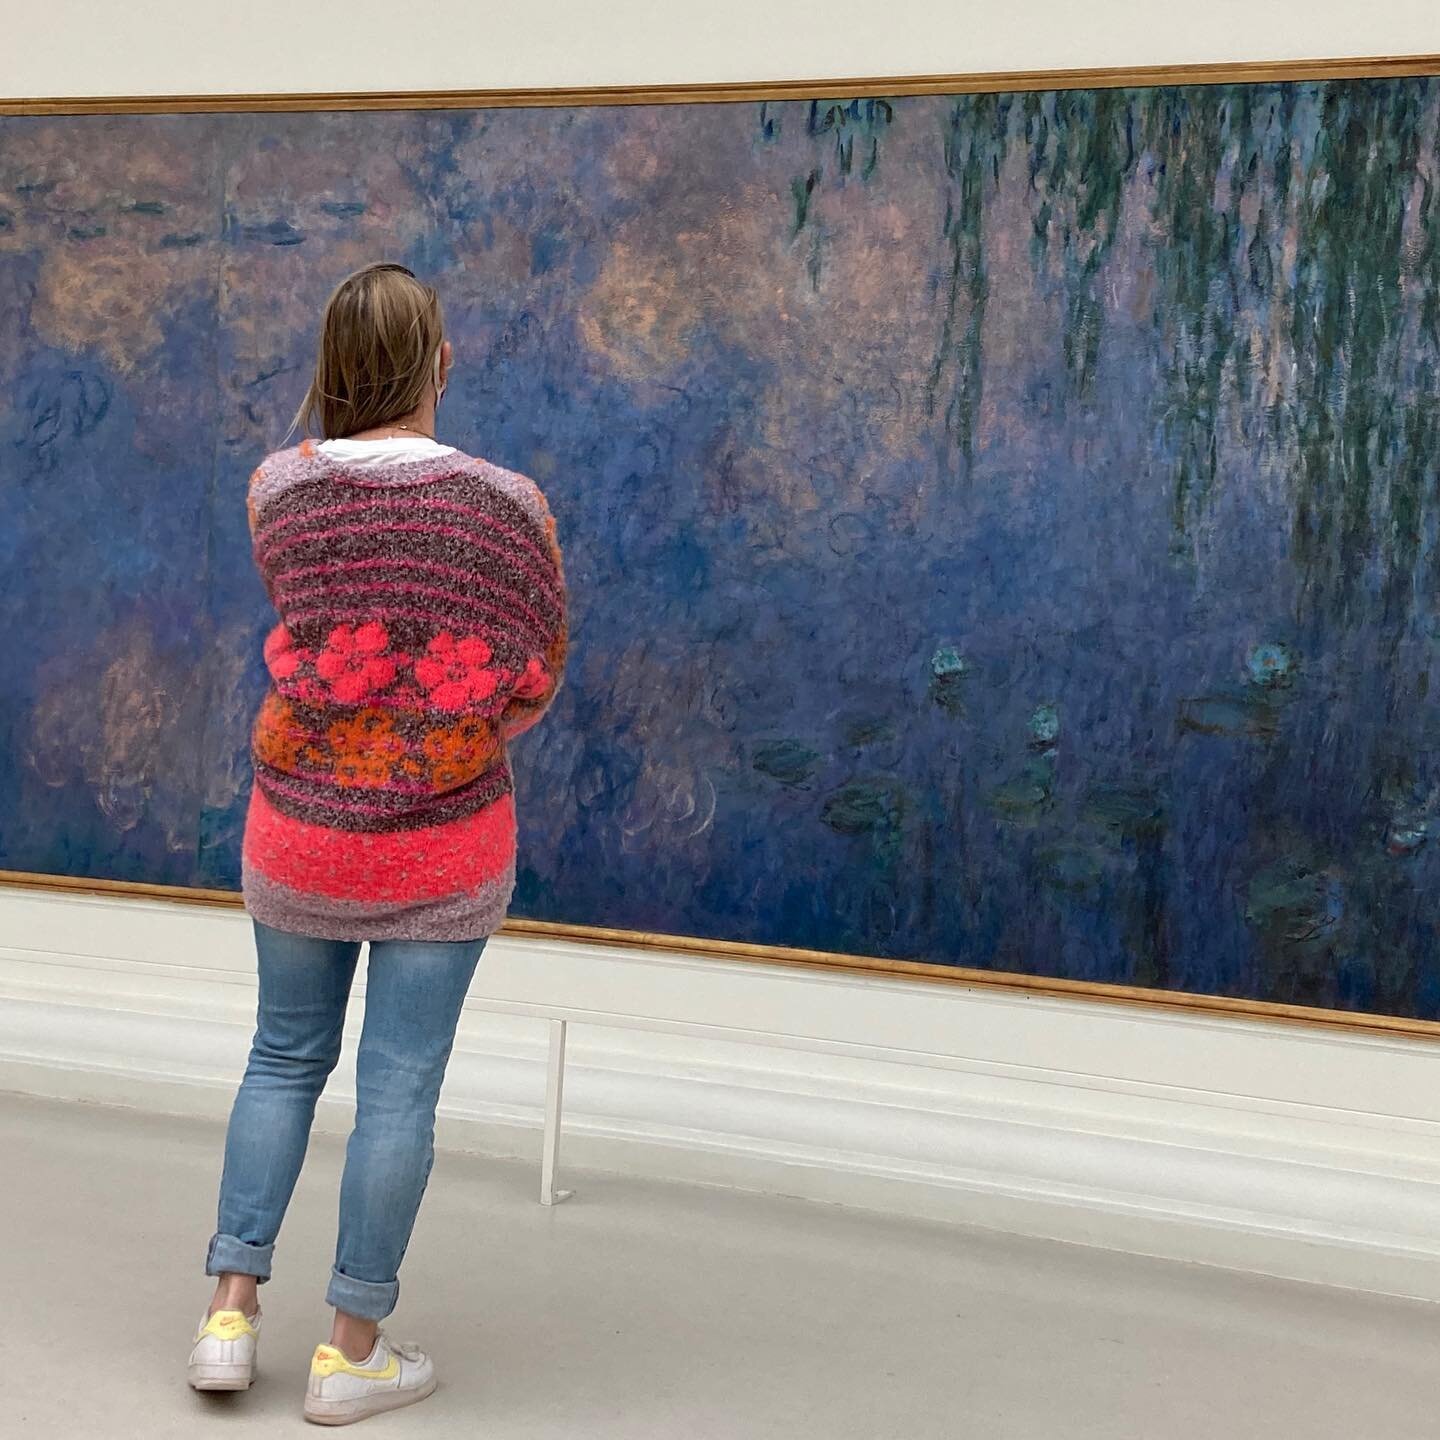 Monet&rsquo;s Water Lilies
@museeorangerie 

Finally getting to bathe in the immersive beauty of these giant paintings in Paris. A very special day.